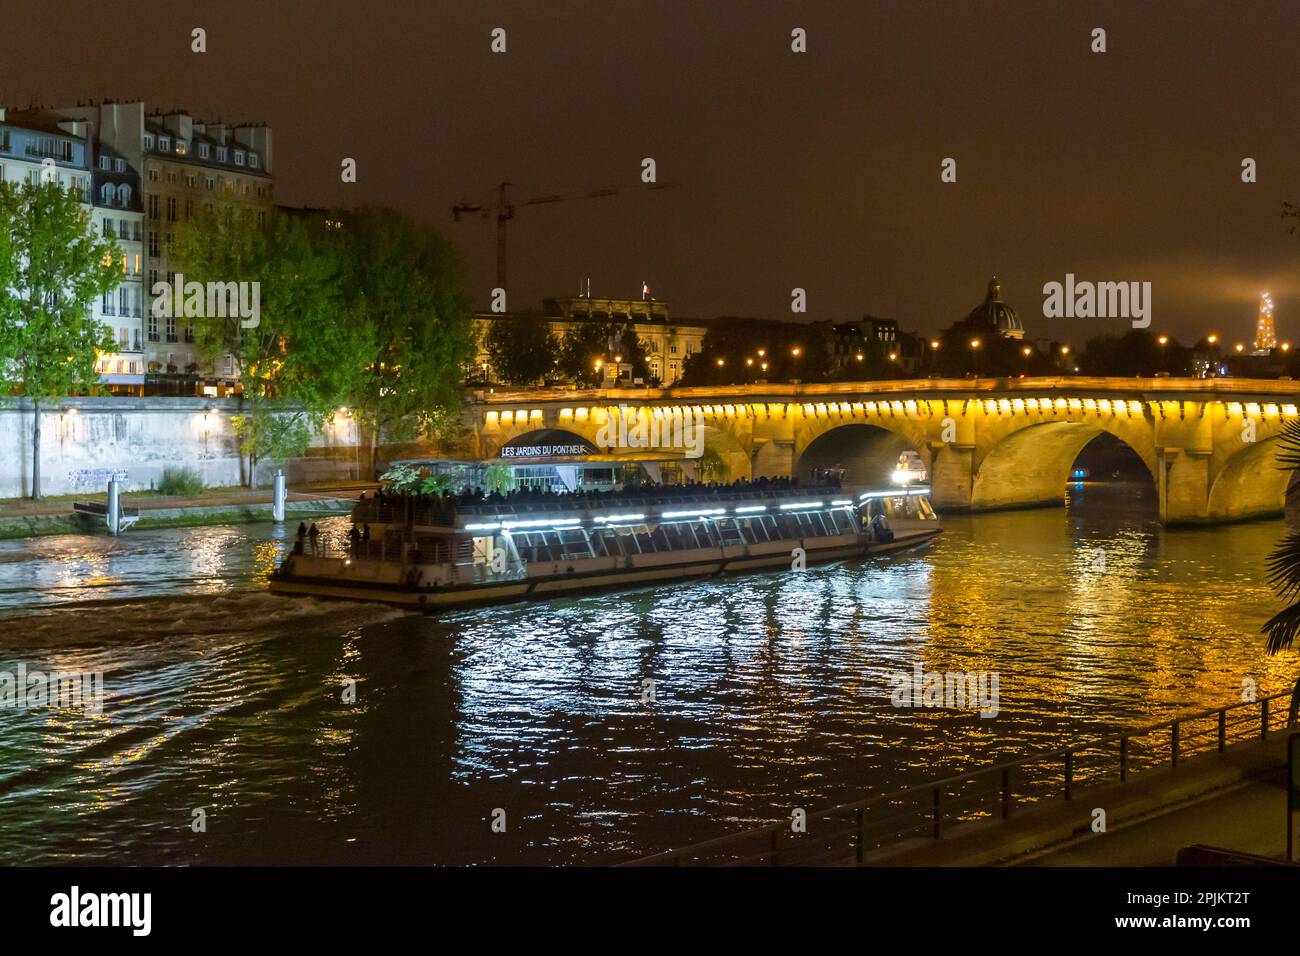 Paris. Bateaux Mouche boat on the canal at night. Stock Photo